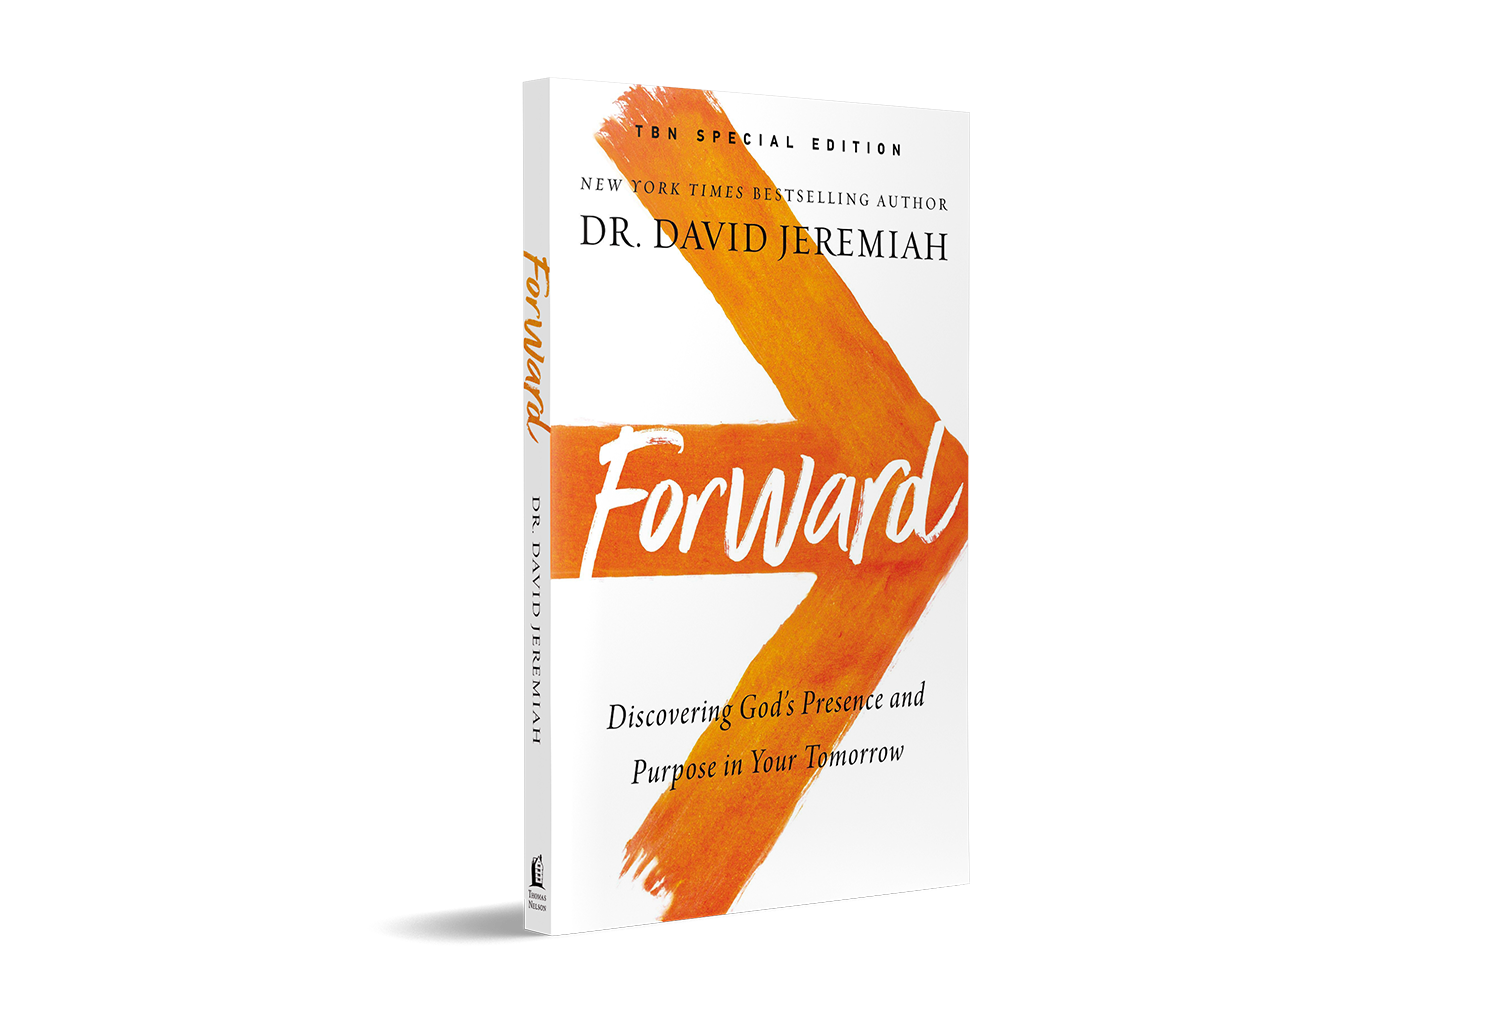 Forward: Discovering God’s Presence and Purpose in Your Tomorrow, by Dr. David Jeremiah on TBN